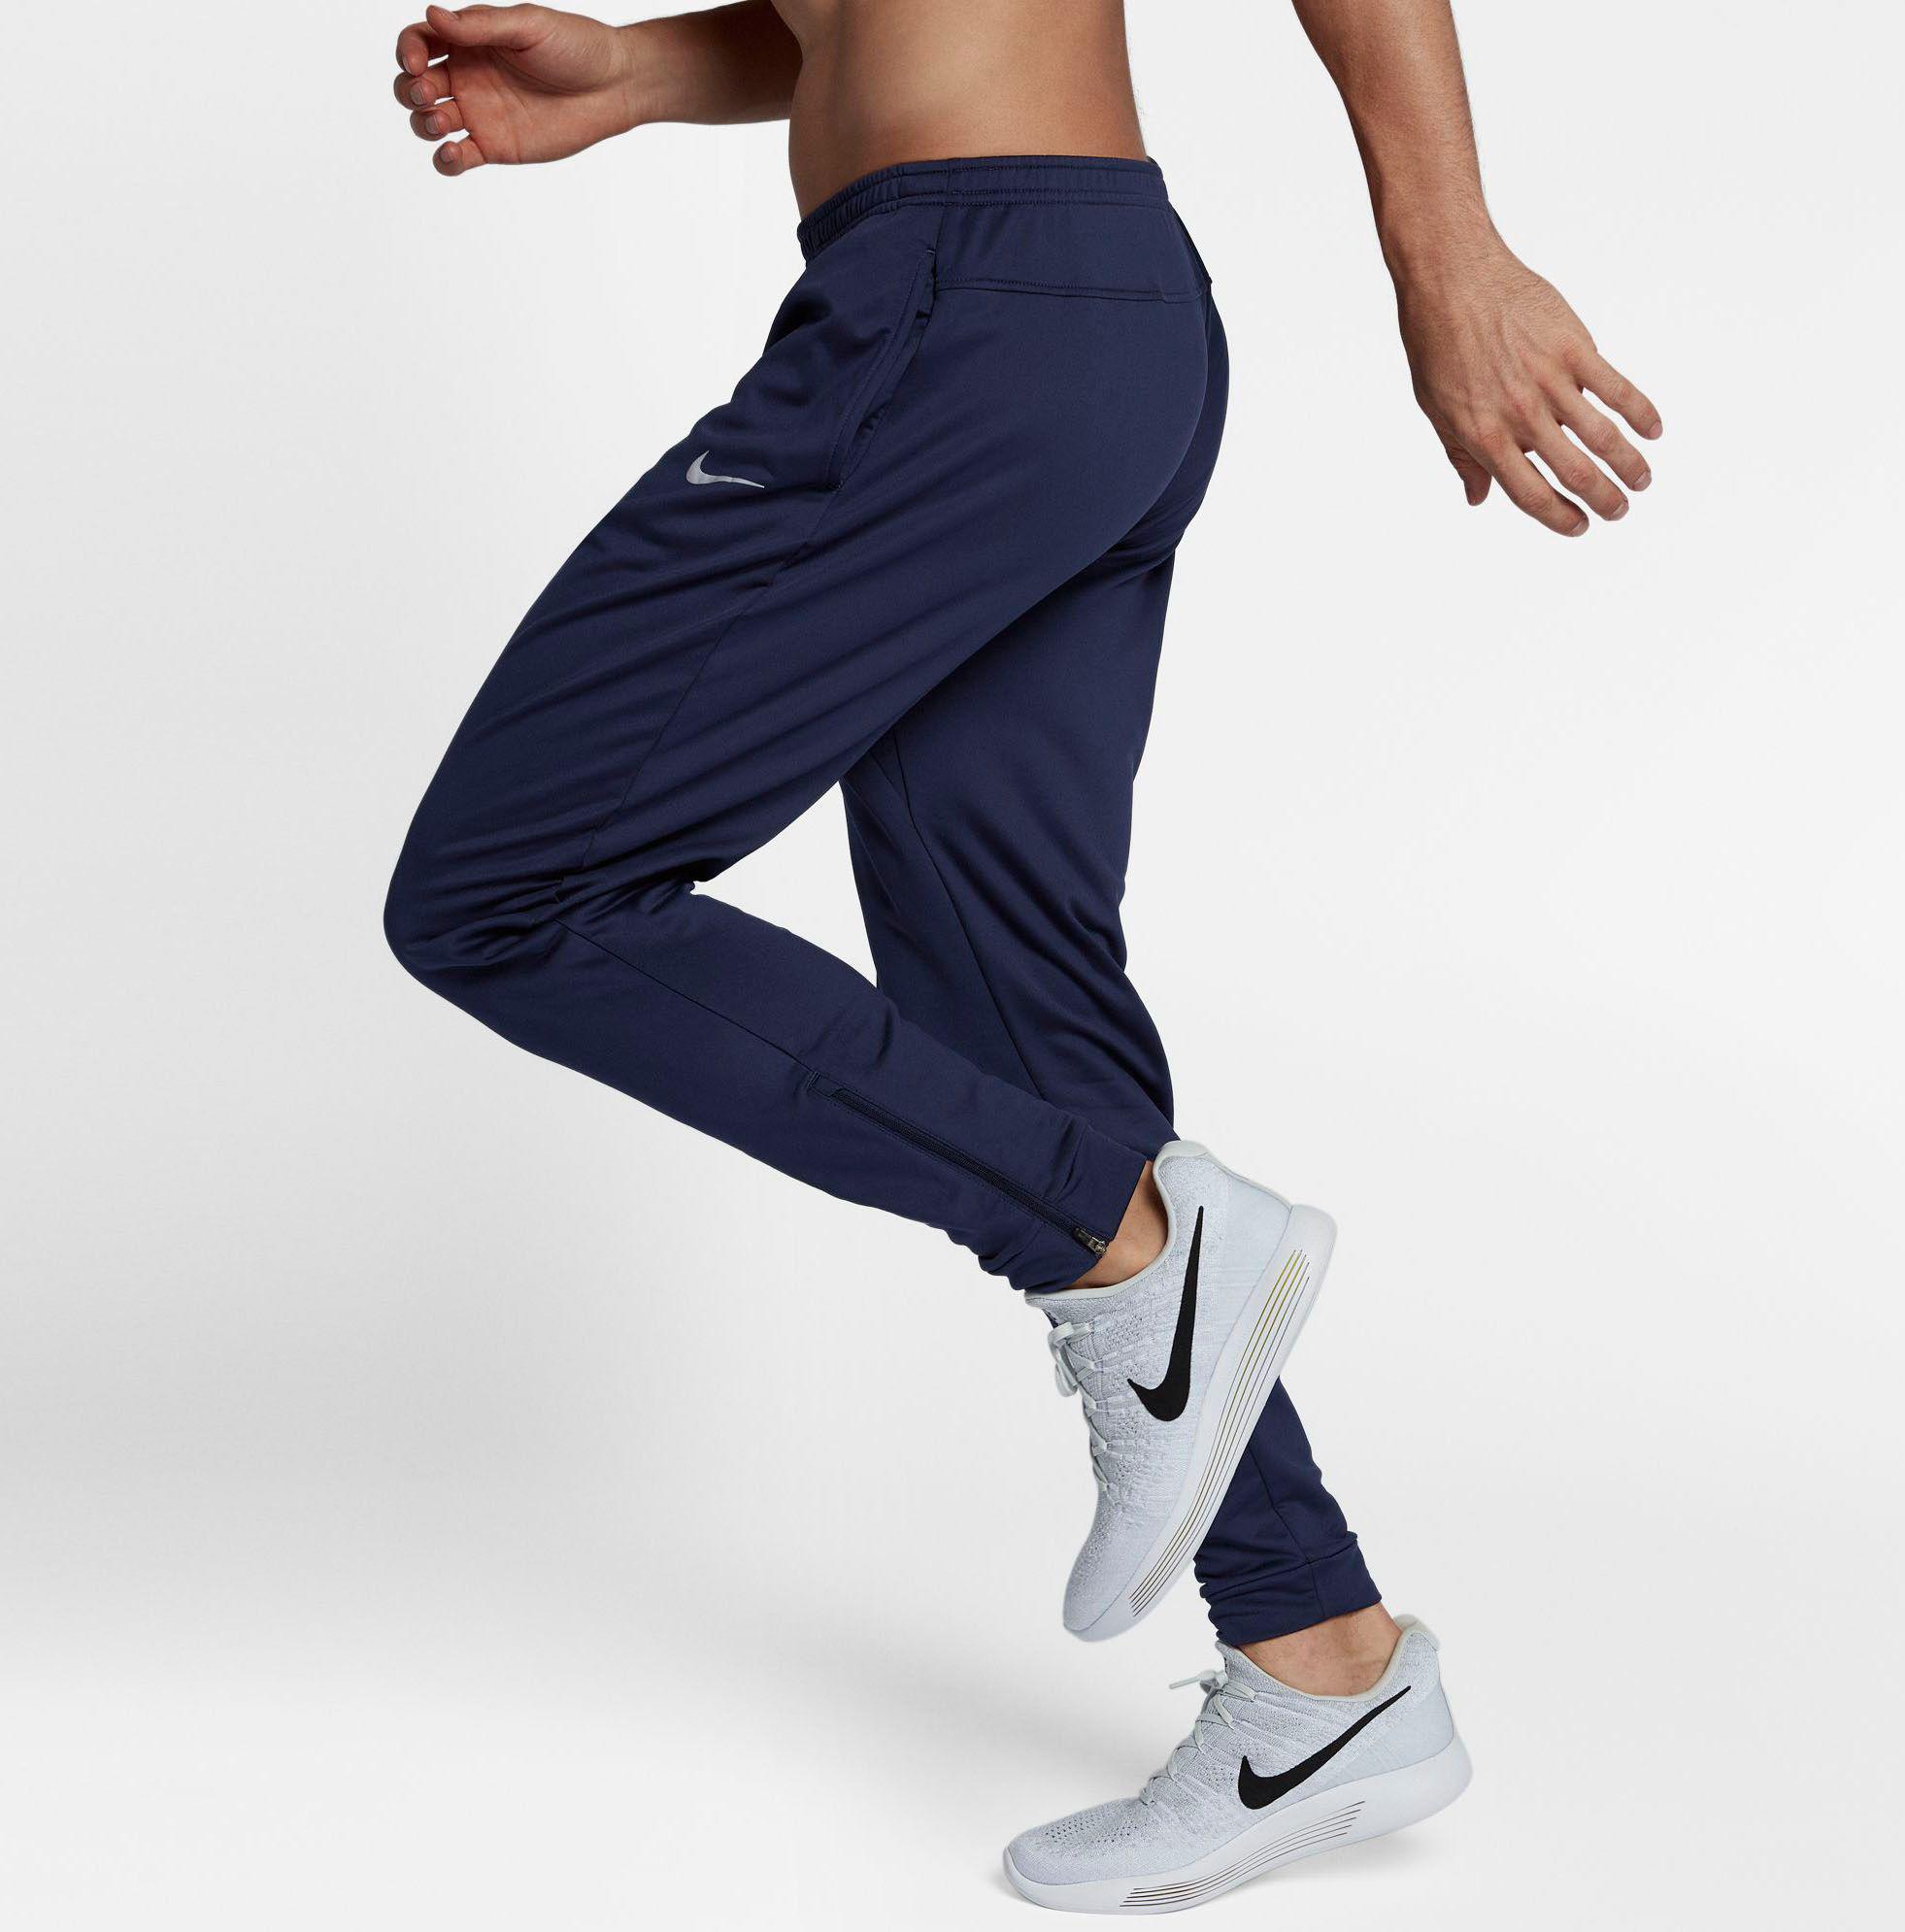 Buy nike therma essential workout pants cheap online